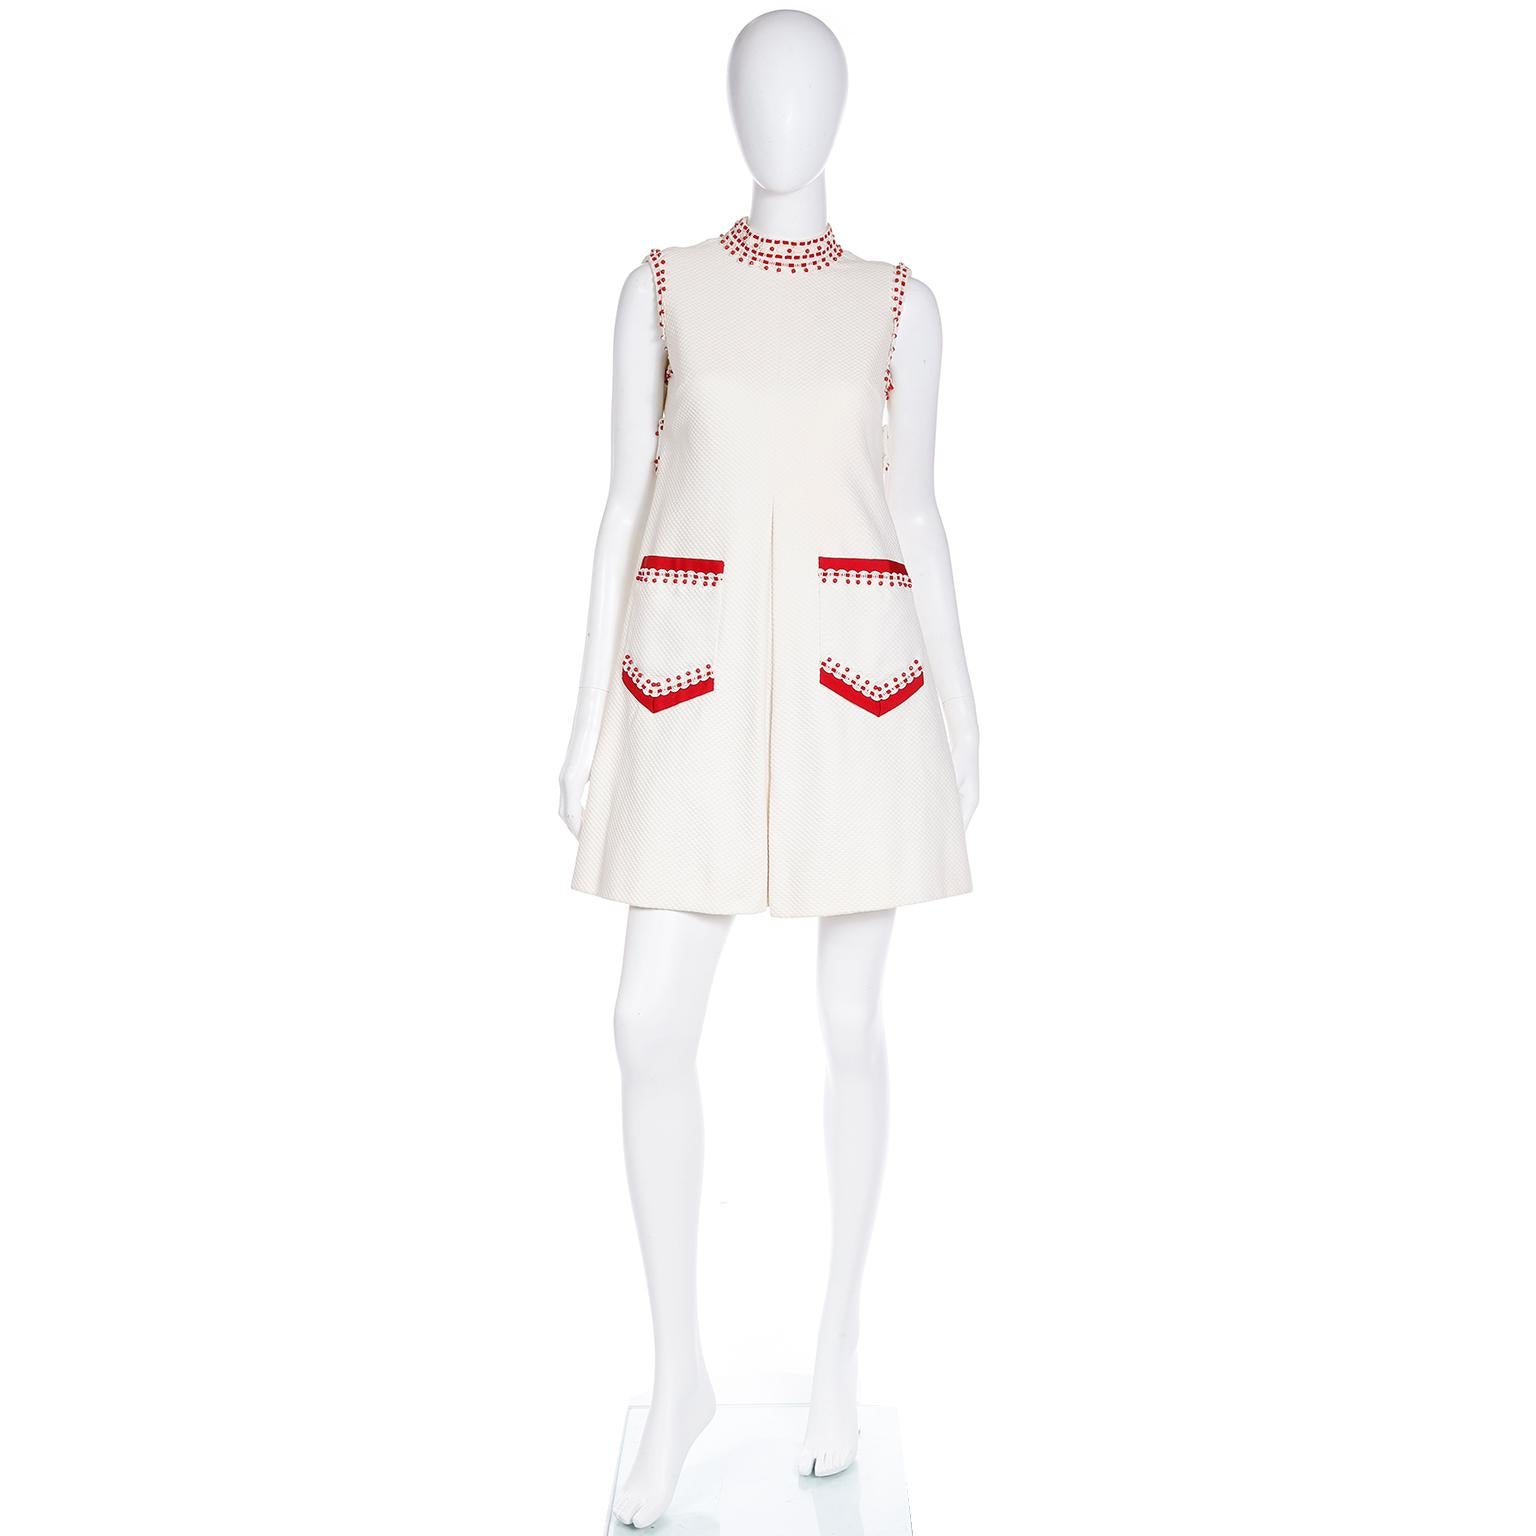 We love vintage Oscar de la Renta dresses, and this sleeveless vintage Oscar de la Renta mini dress is a rare piece he designed in the 1960's. This cotton pique Oscar de la Renta Boutique baby doll style dress has pretty faceted red beads and cherry